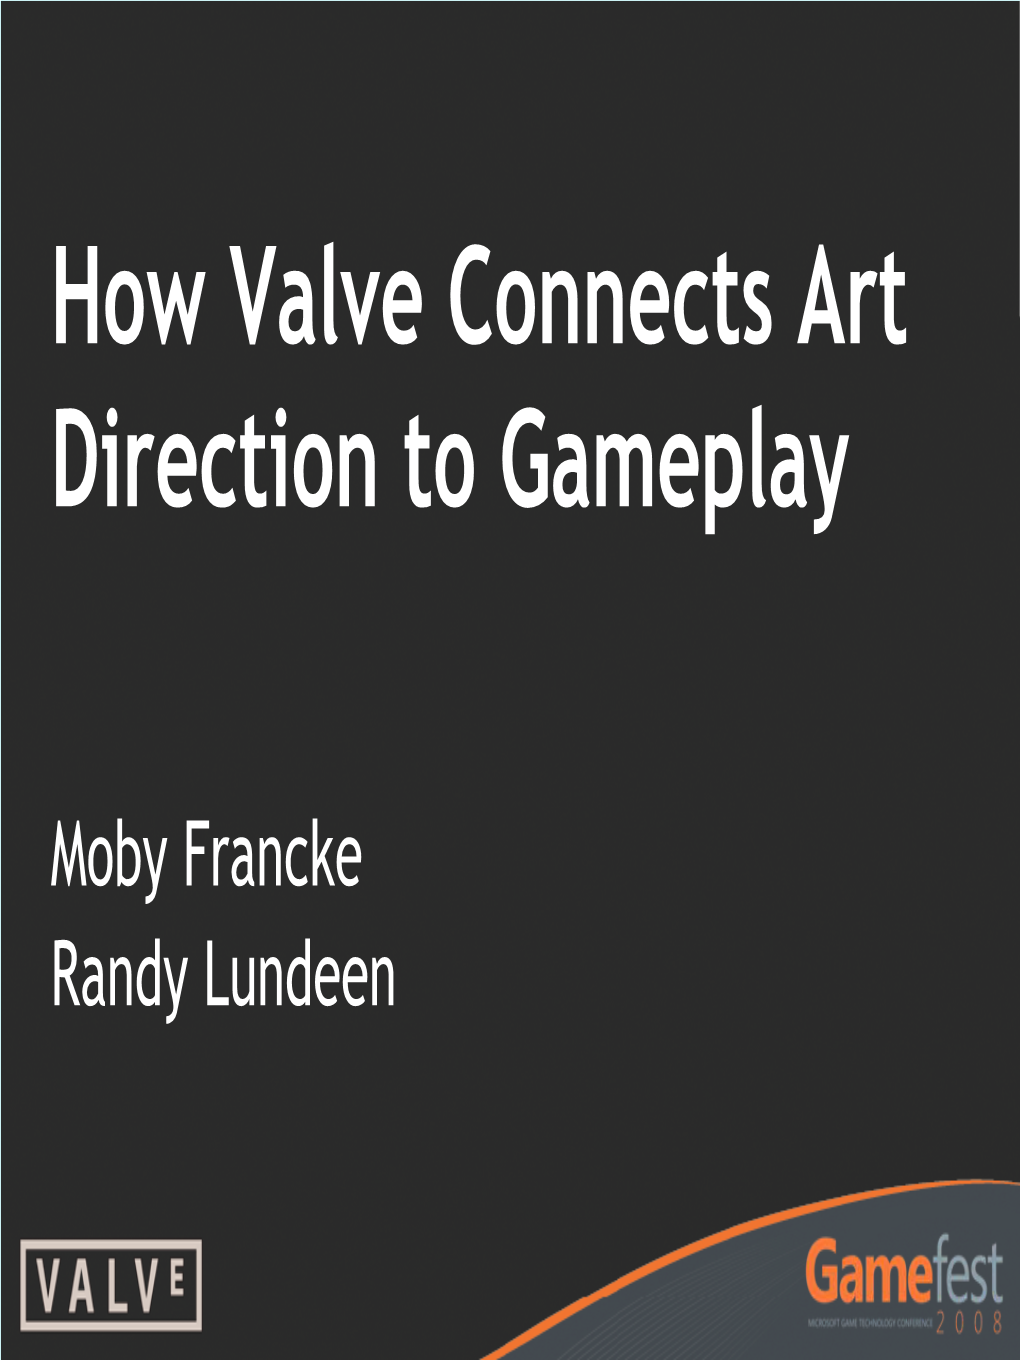 How Valve Connects Art Direction to Gameplay